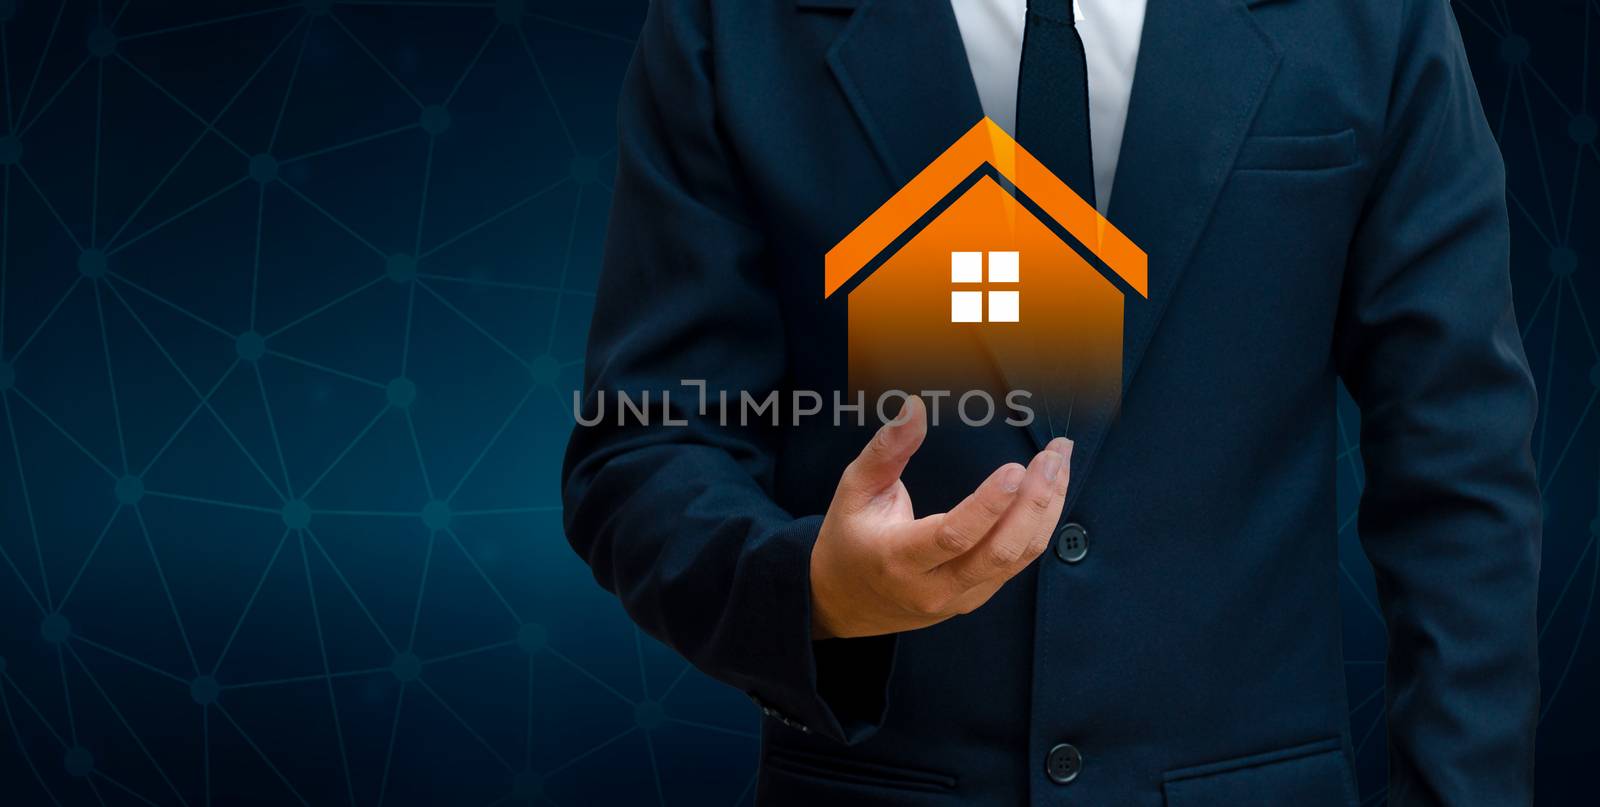 The house is in the hands of the business man  home icon or symbol Concept of home automation home applications and future by sarayut_thaneerat